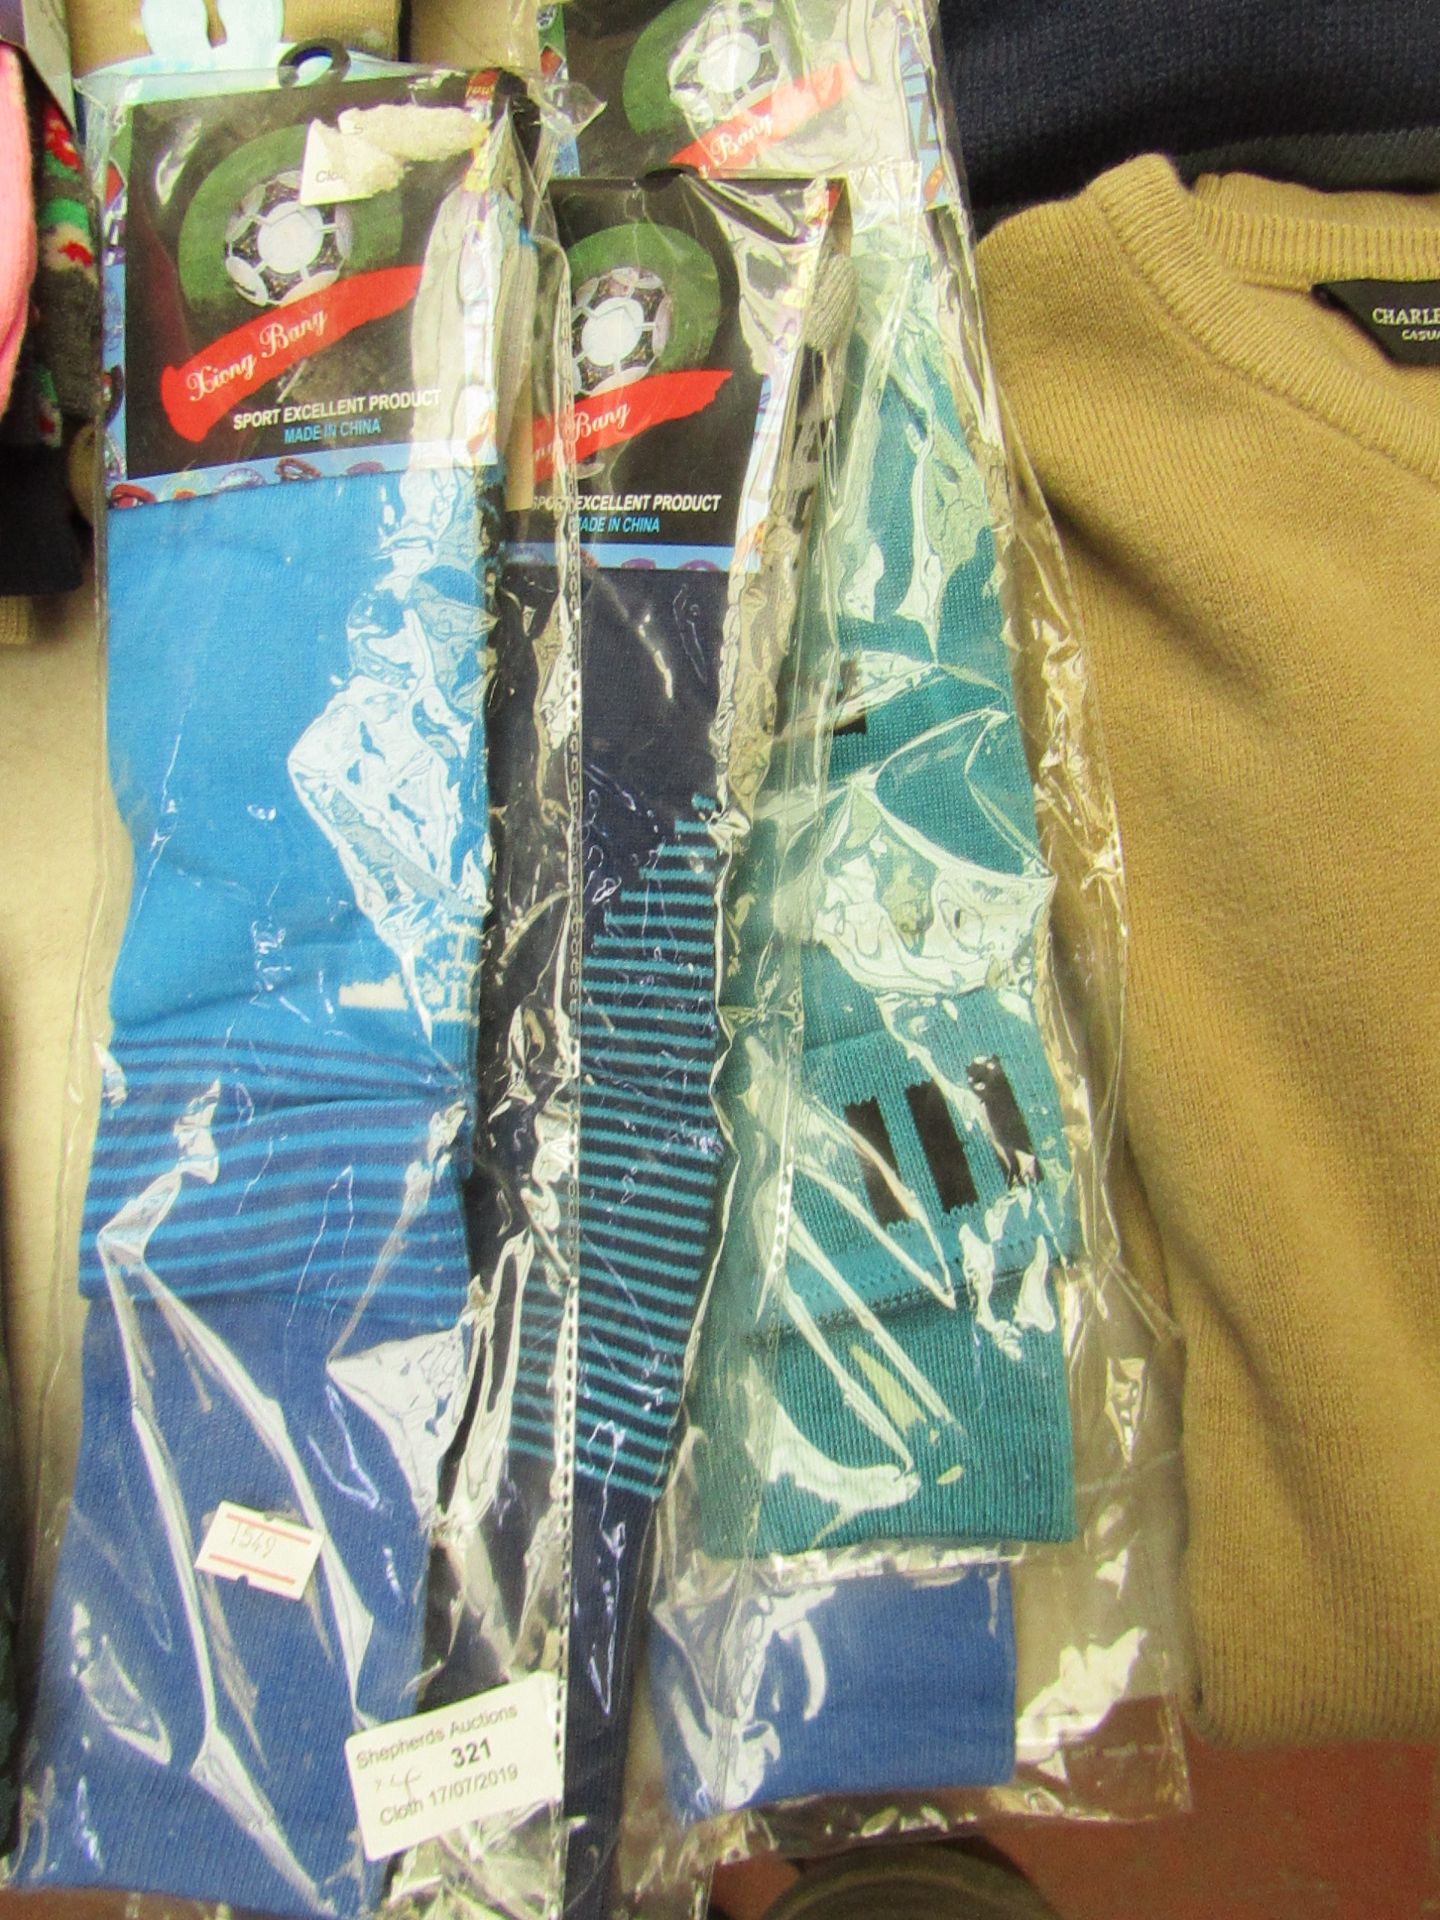 4 x pairs of Football socks new & packaged